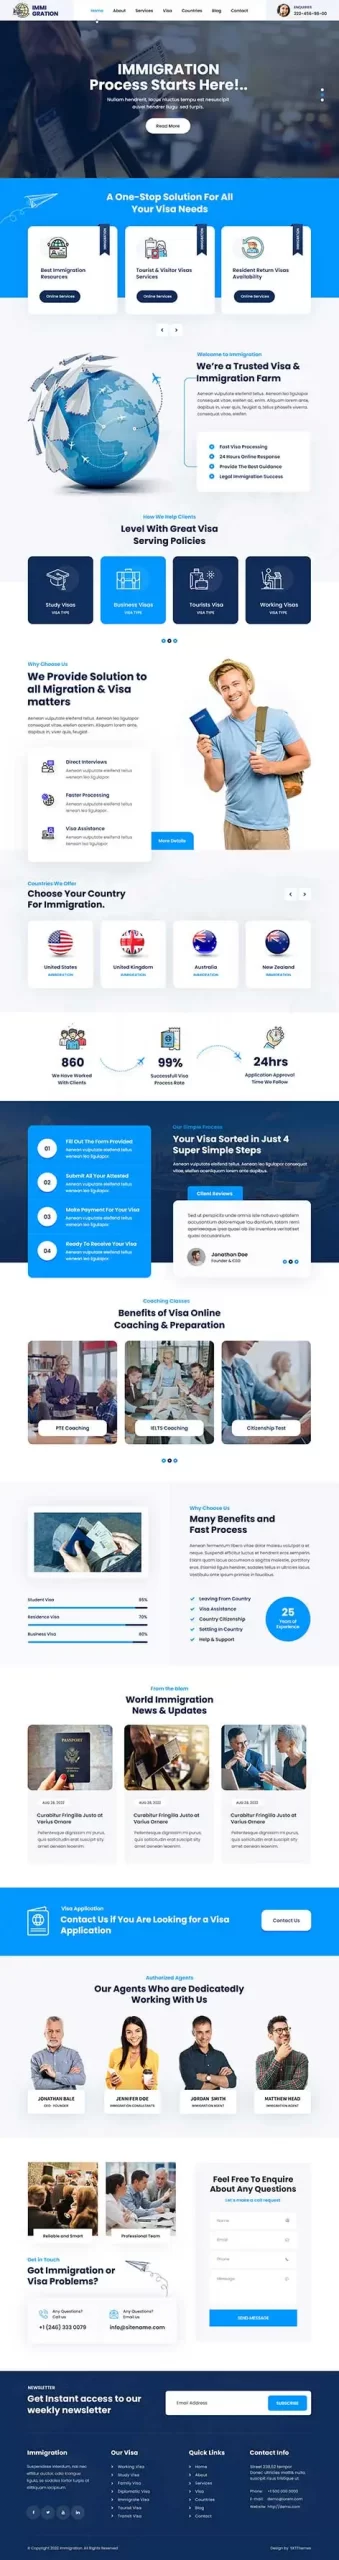 Immigration Consulting WordPress Theme